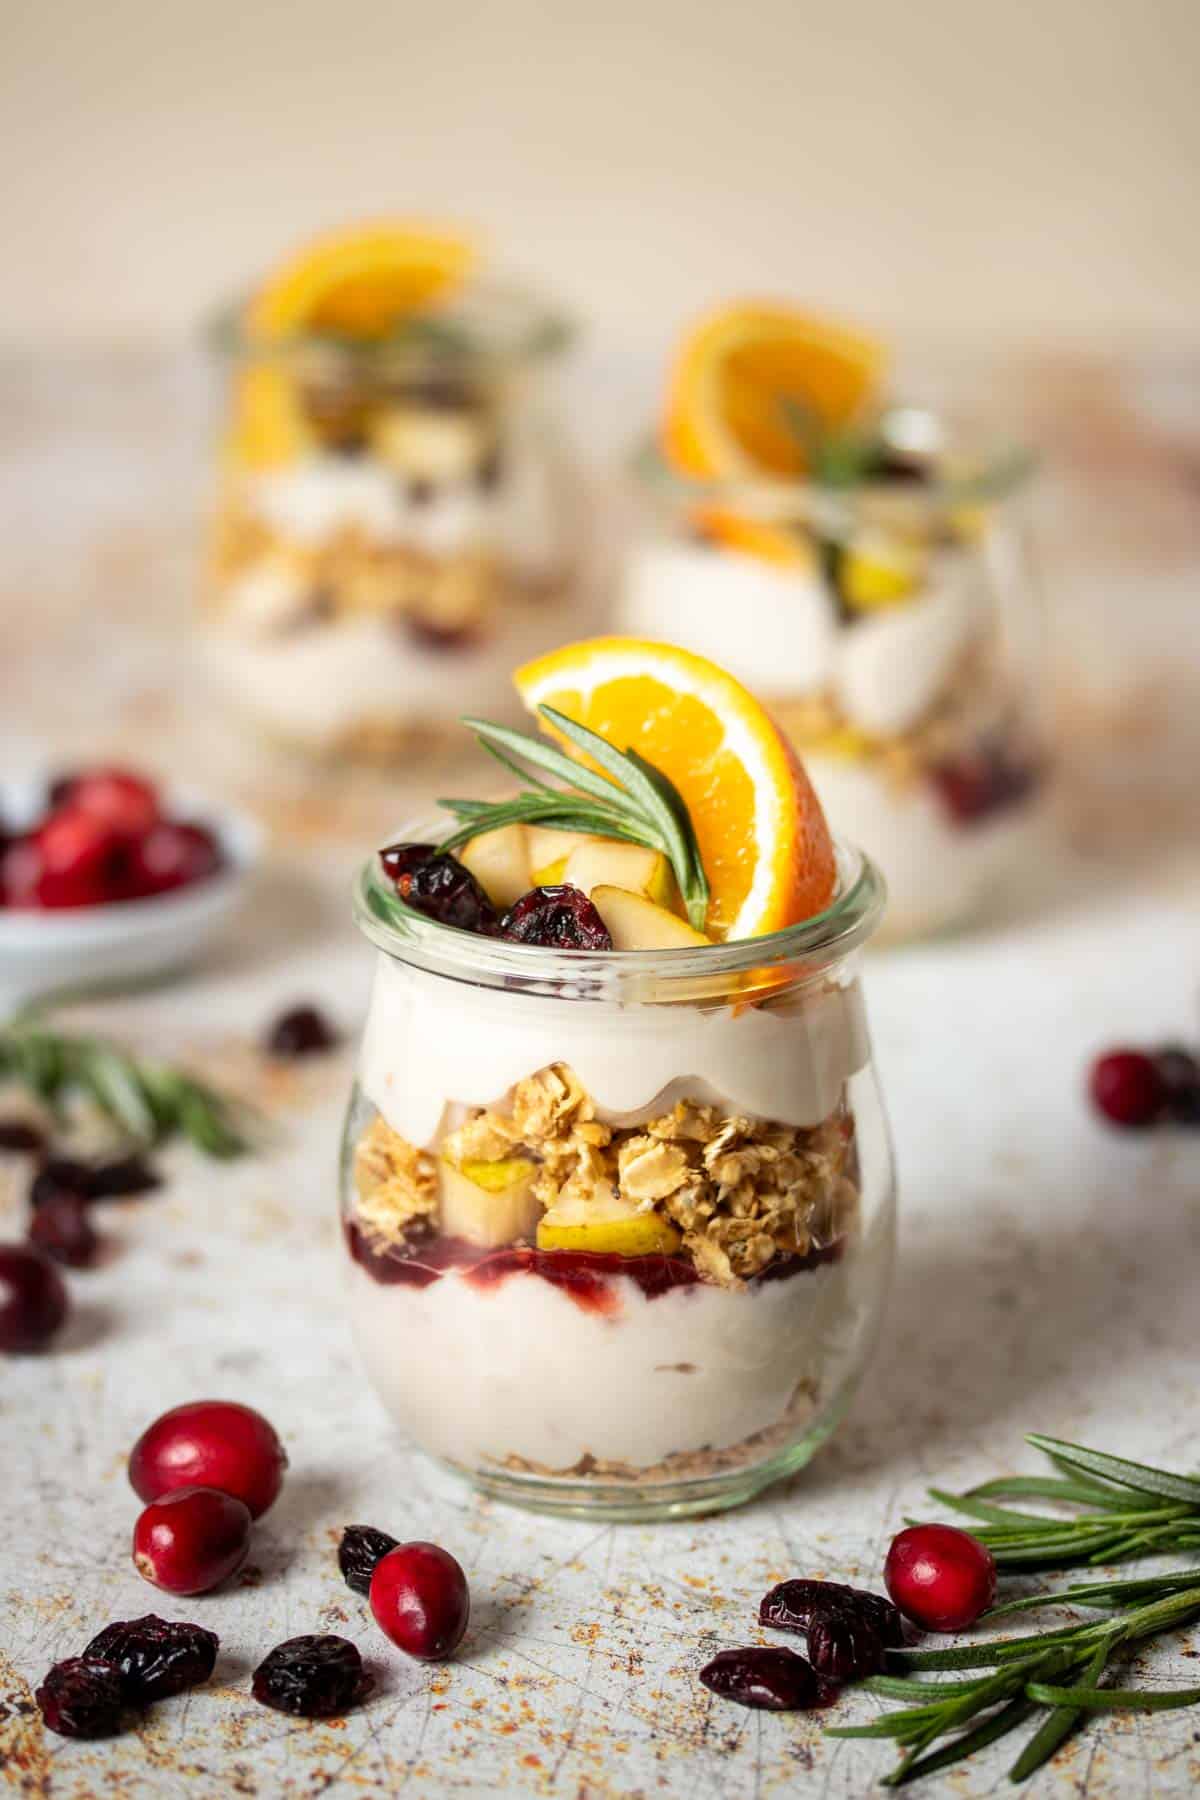 A layered breakfast parfait with yogurt, granola and fruit in a glass jar topped with an orange slice.